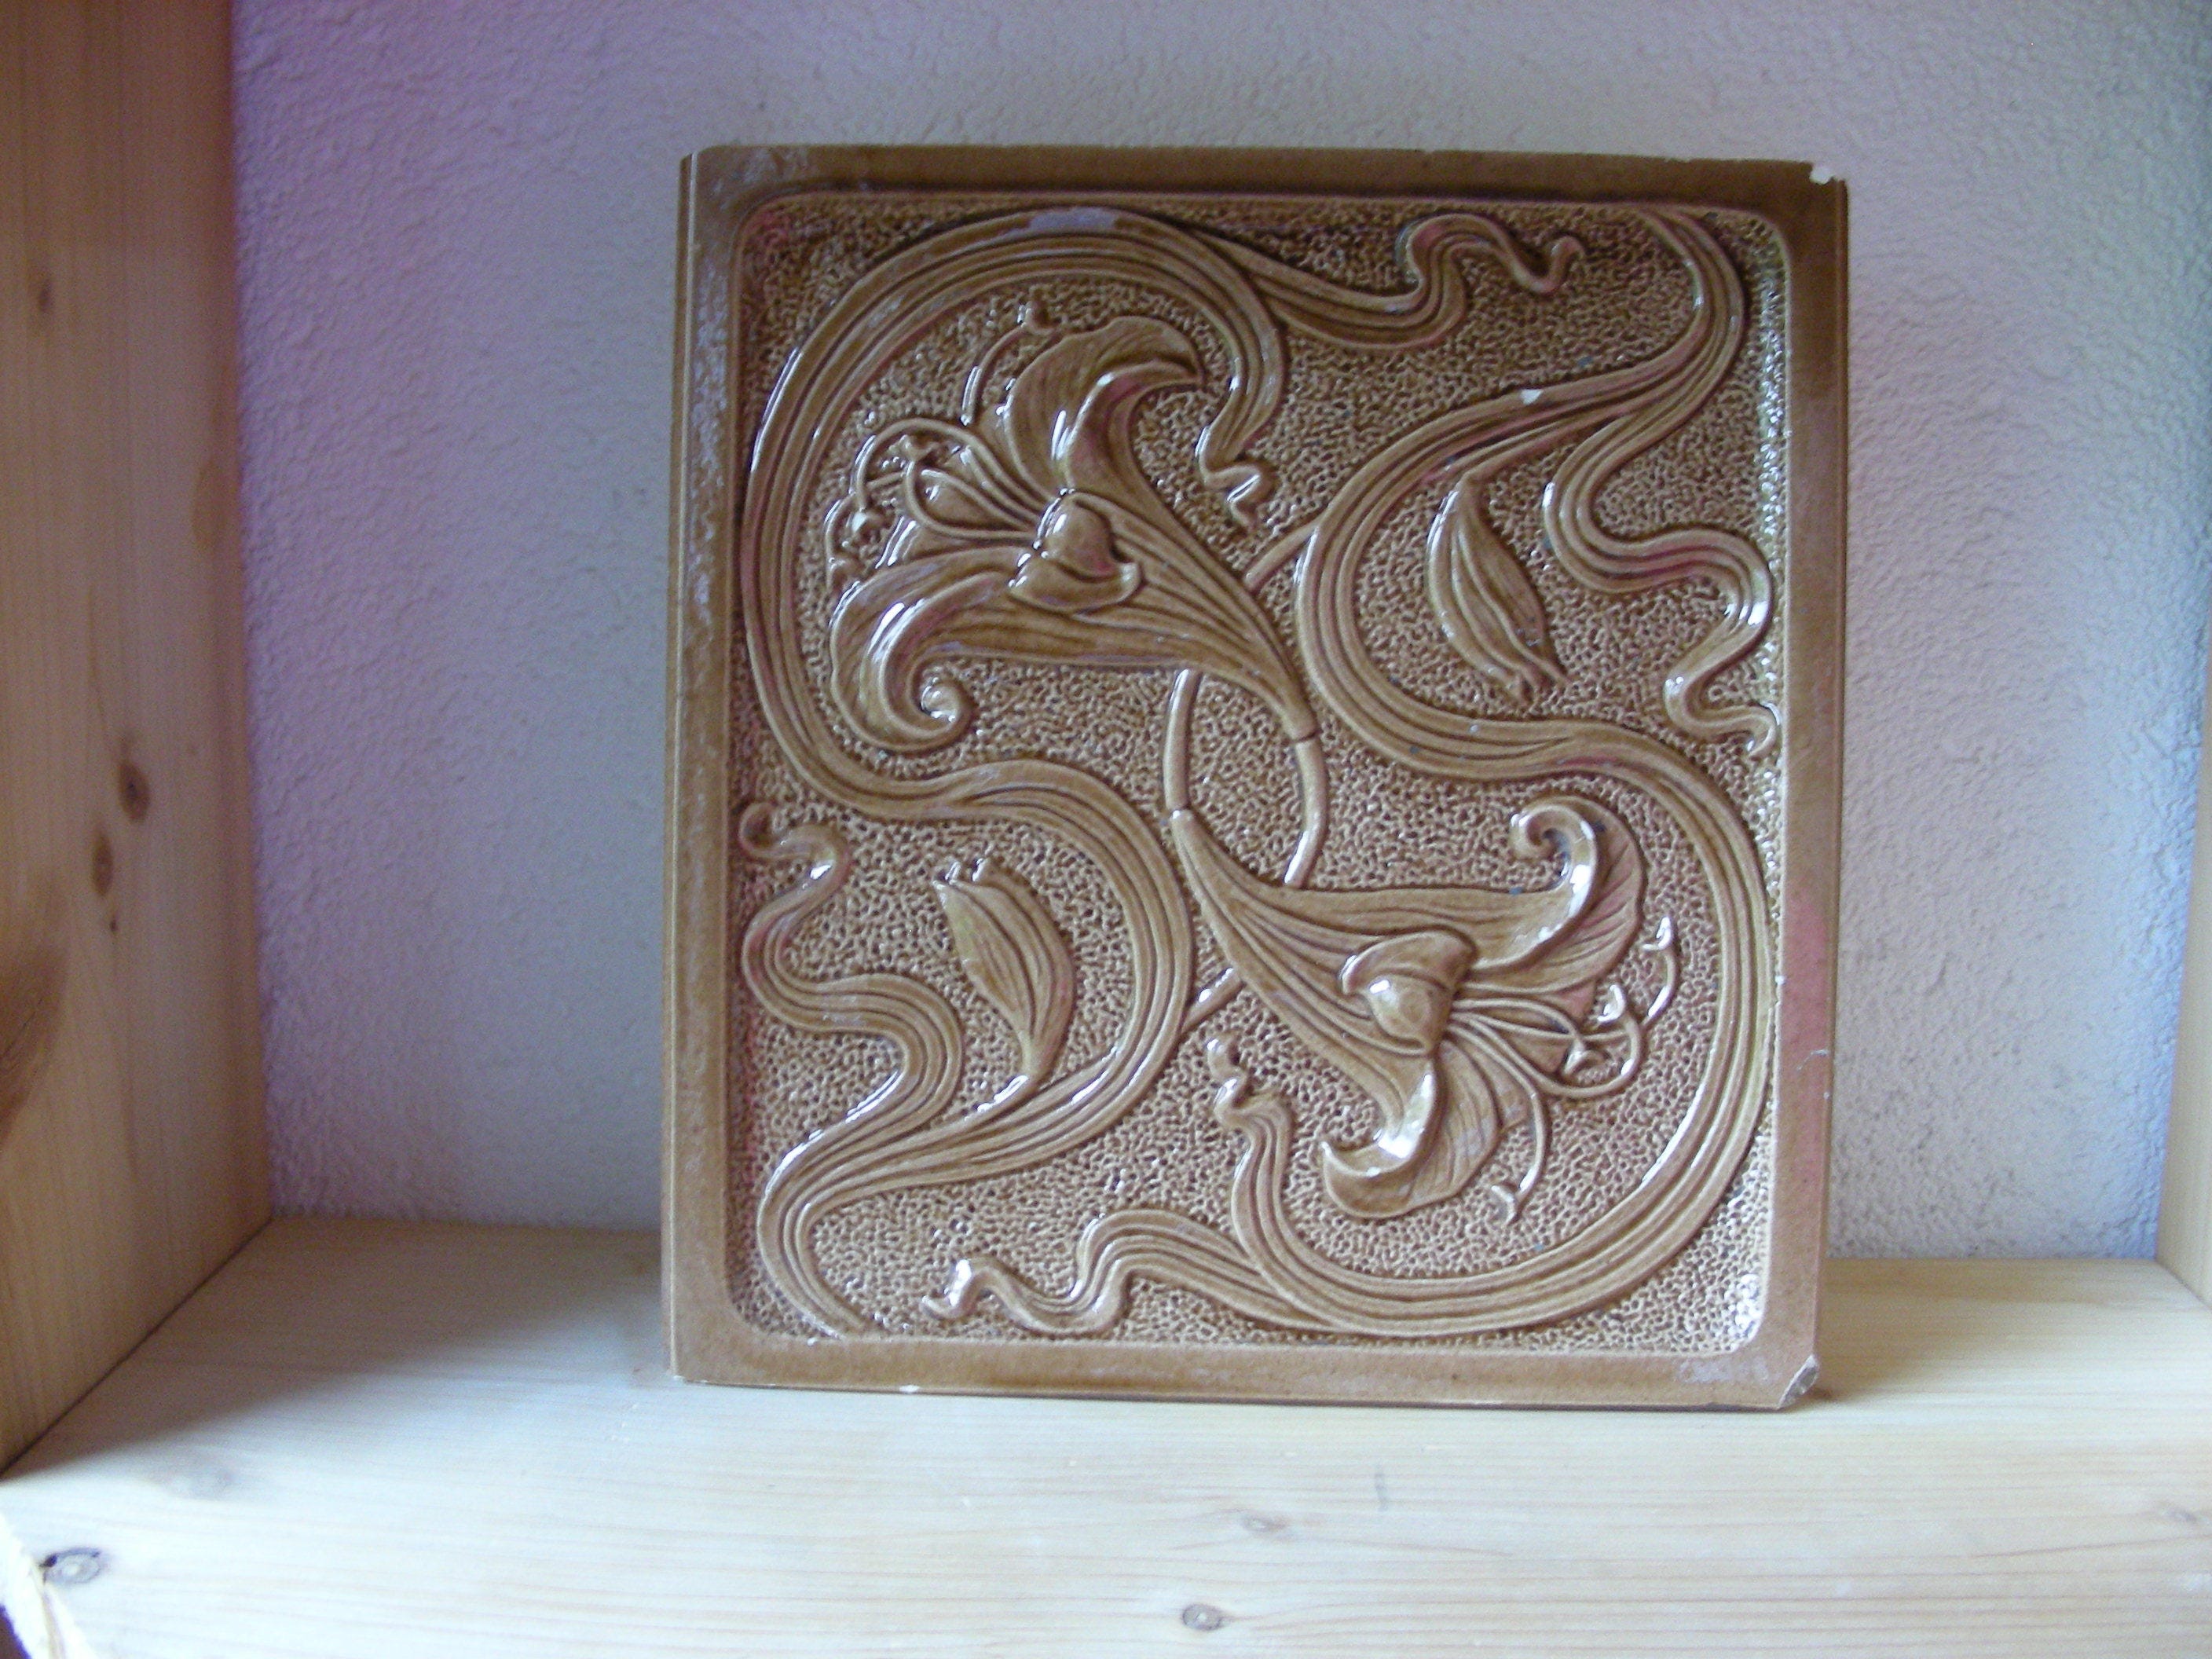 Reserved J Masonry Tile From Vintage Oven Special Offer On